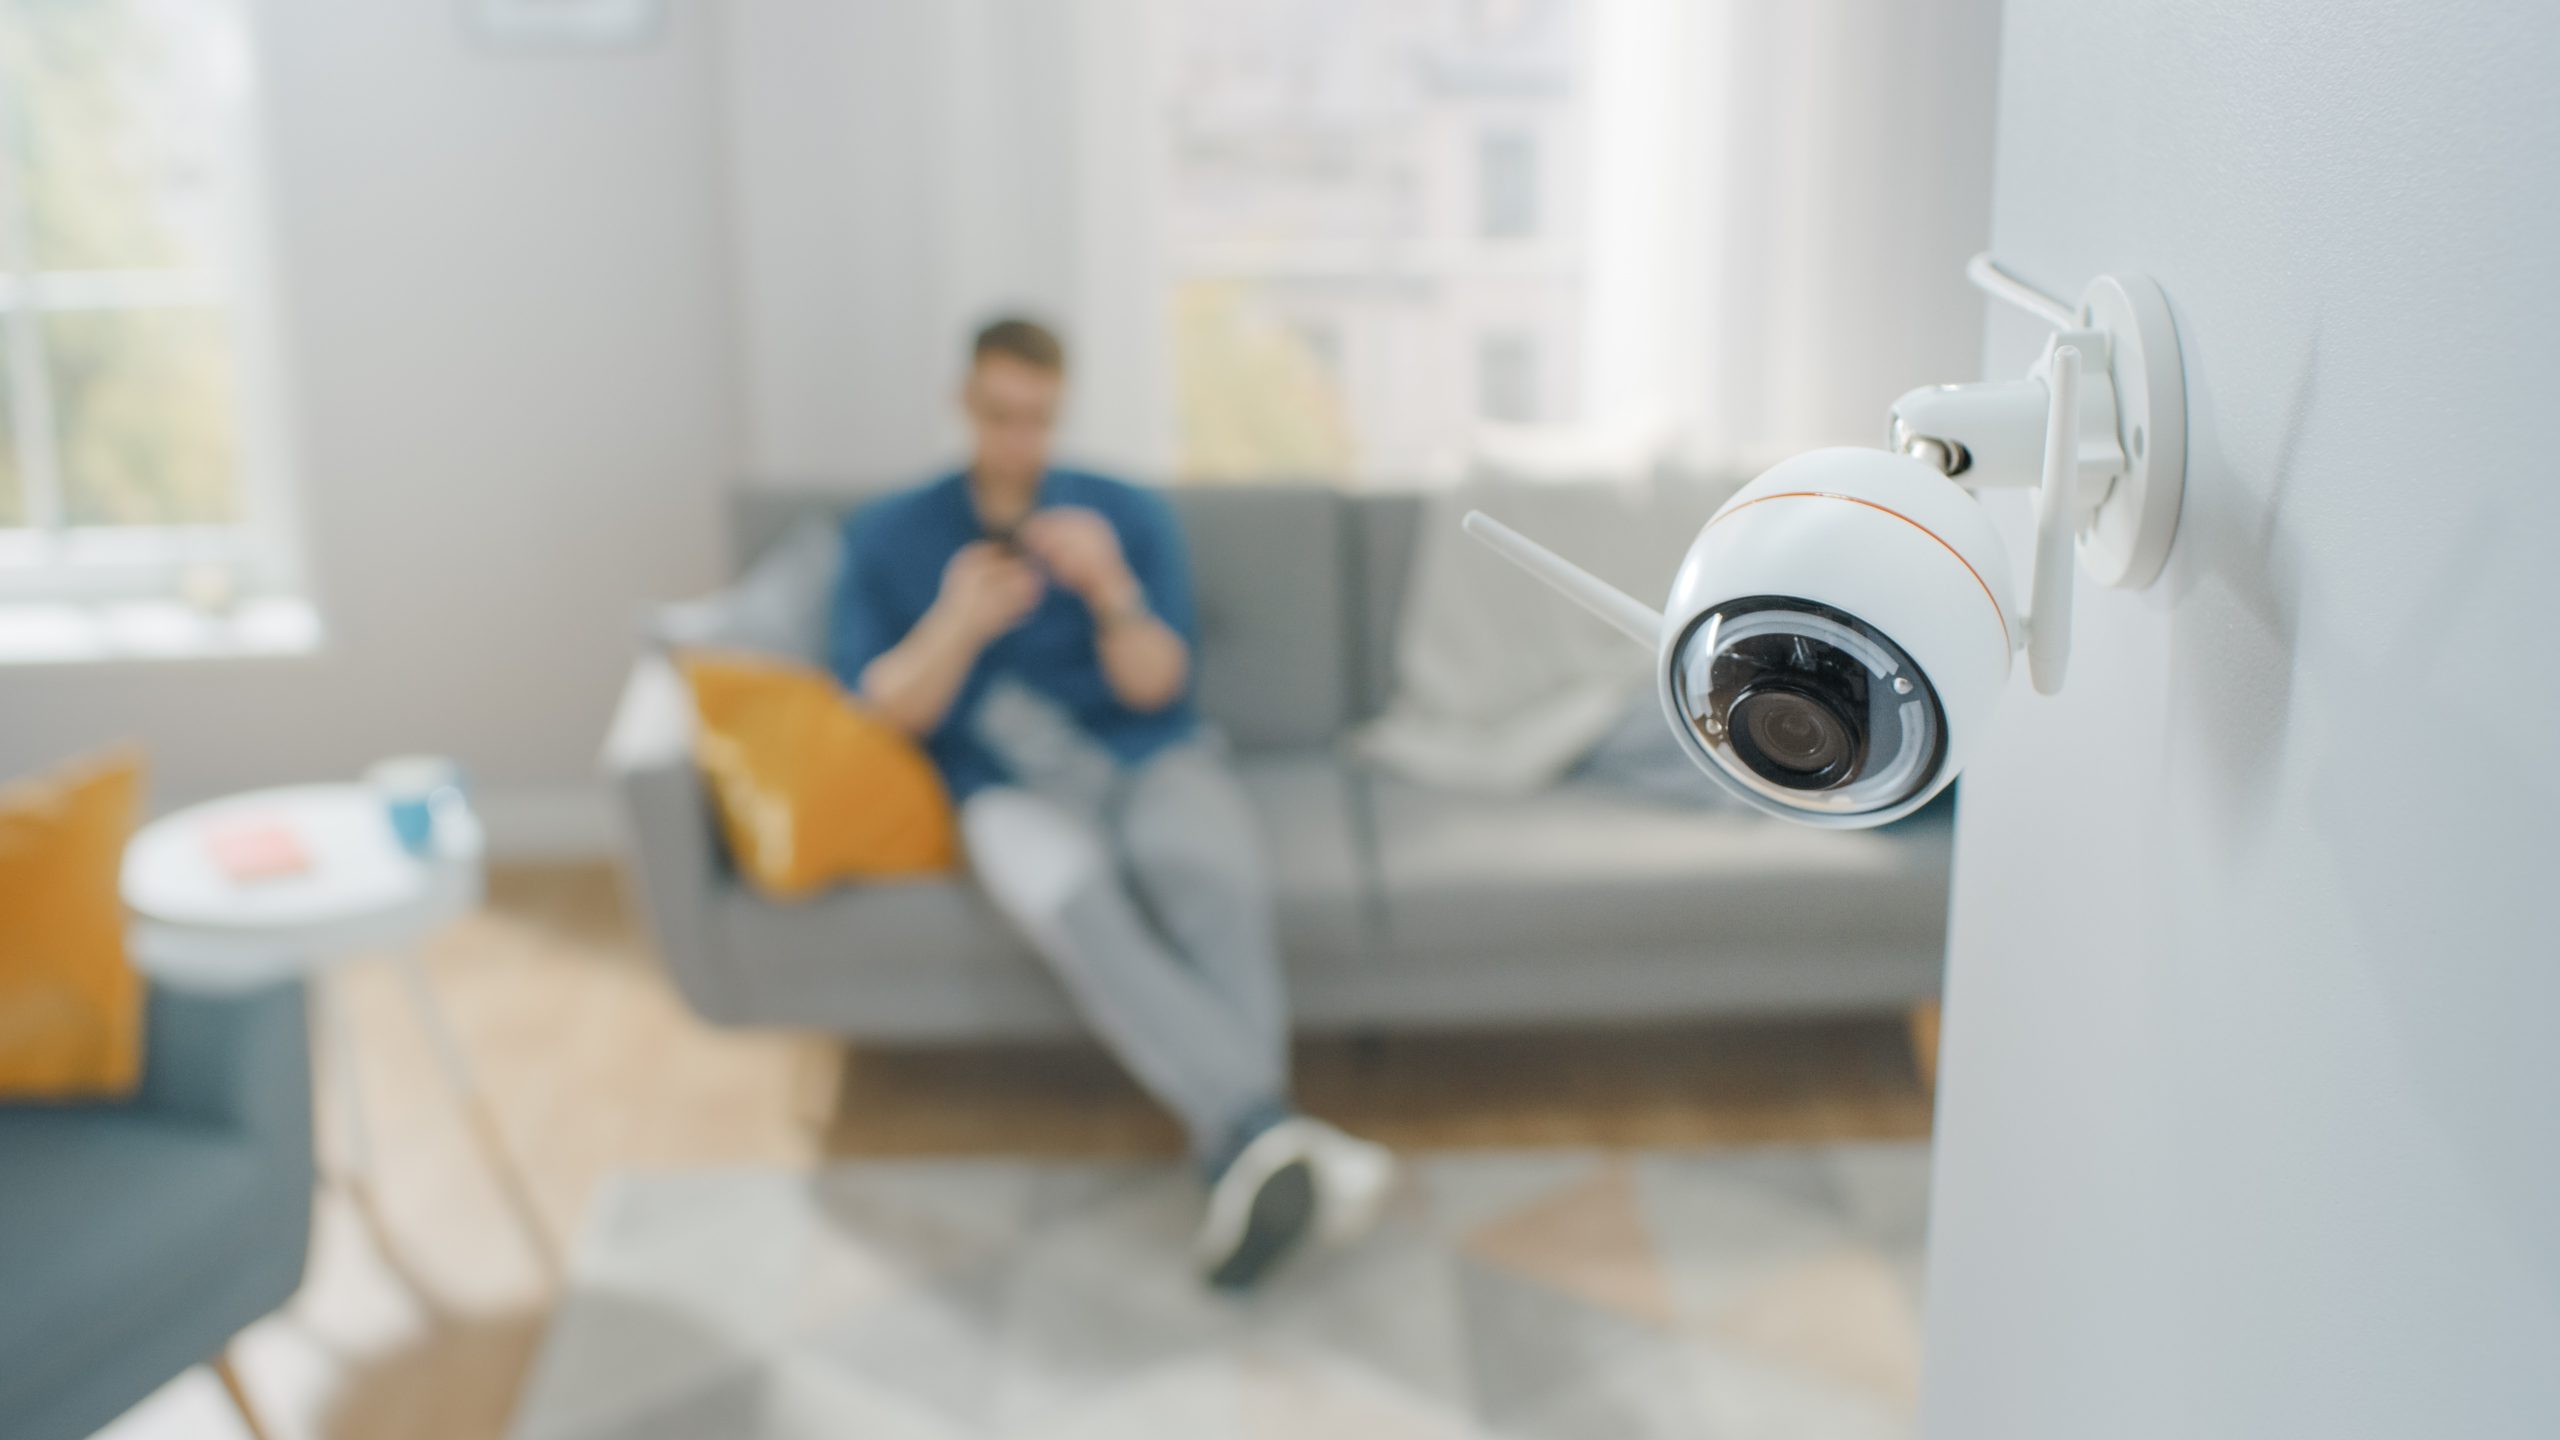 Home security technician admits hacking customers' security cameras | DeviceDaily.com